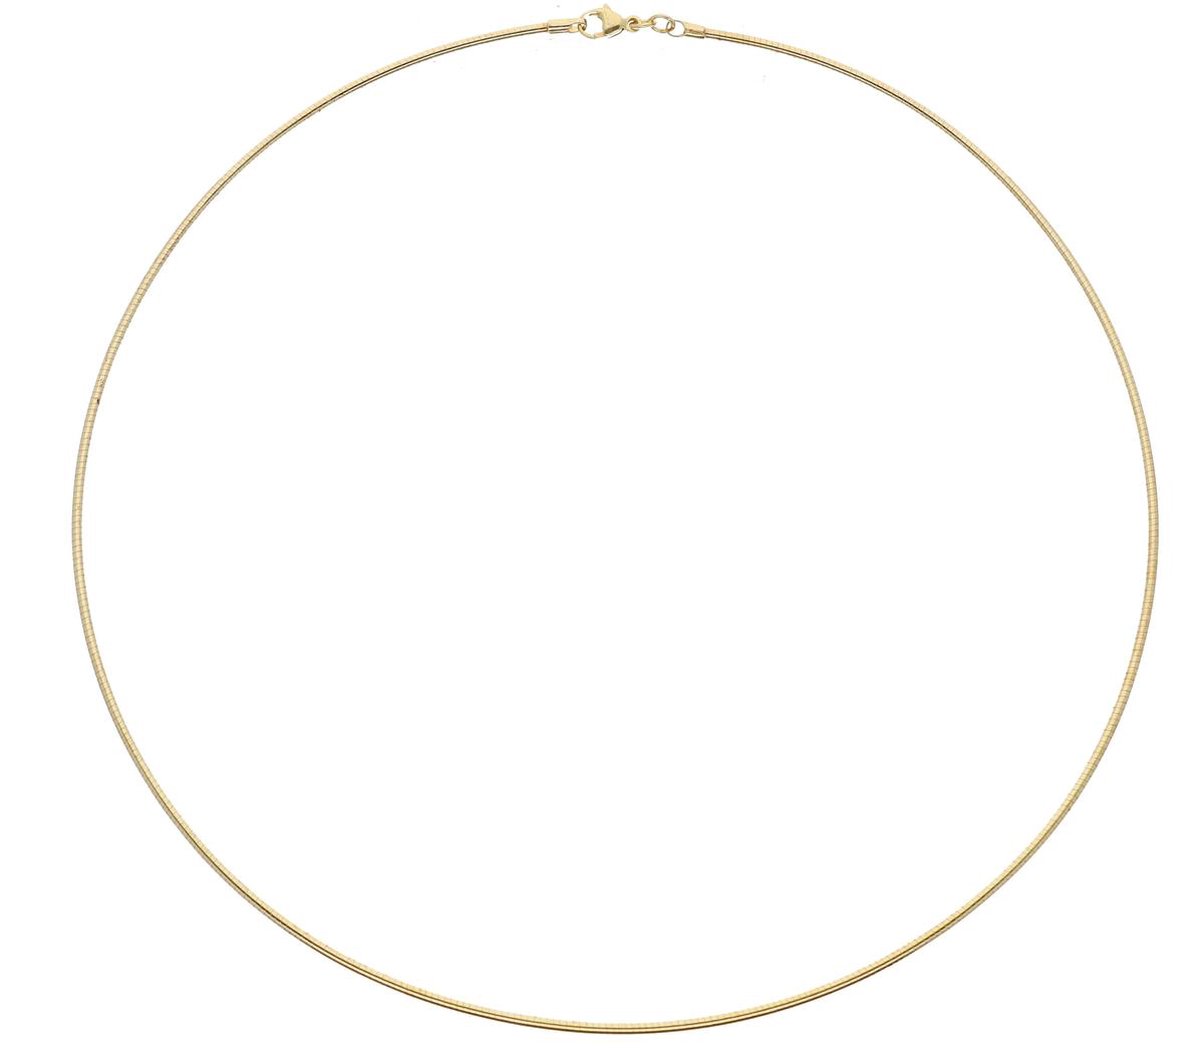 Glowketting - double - messing geel verguld - omega 1.5 mm - rond - 45 cm